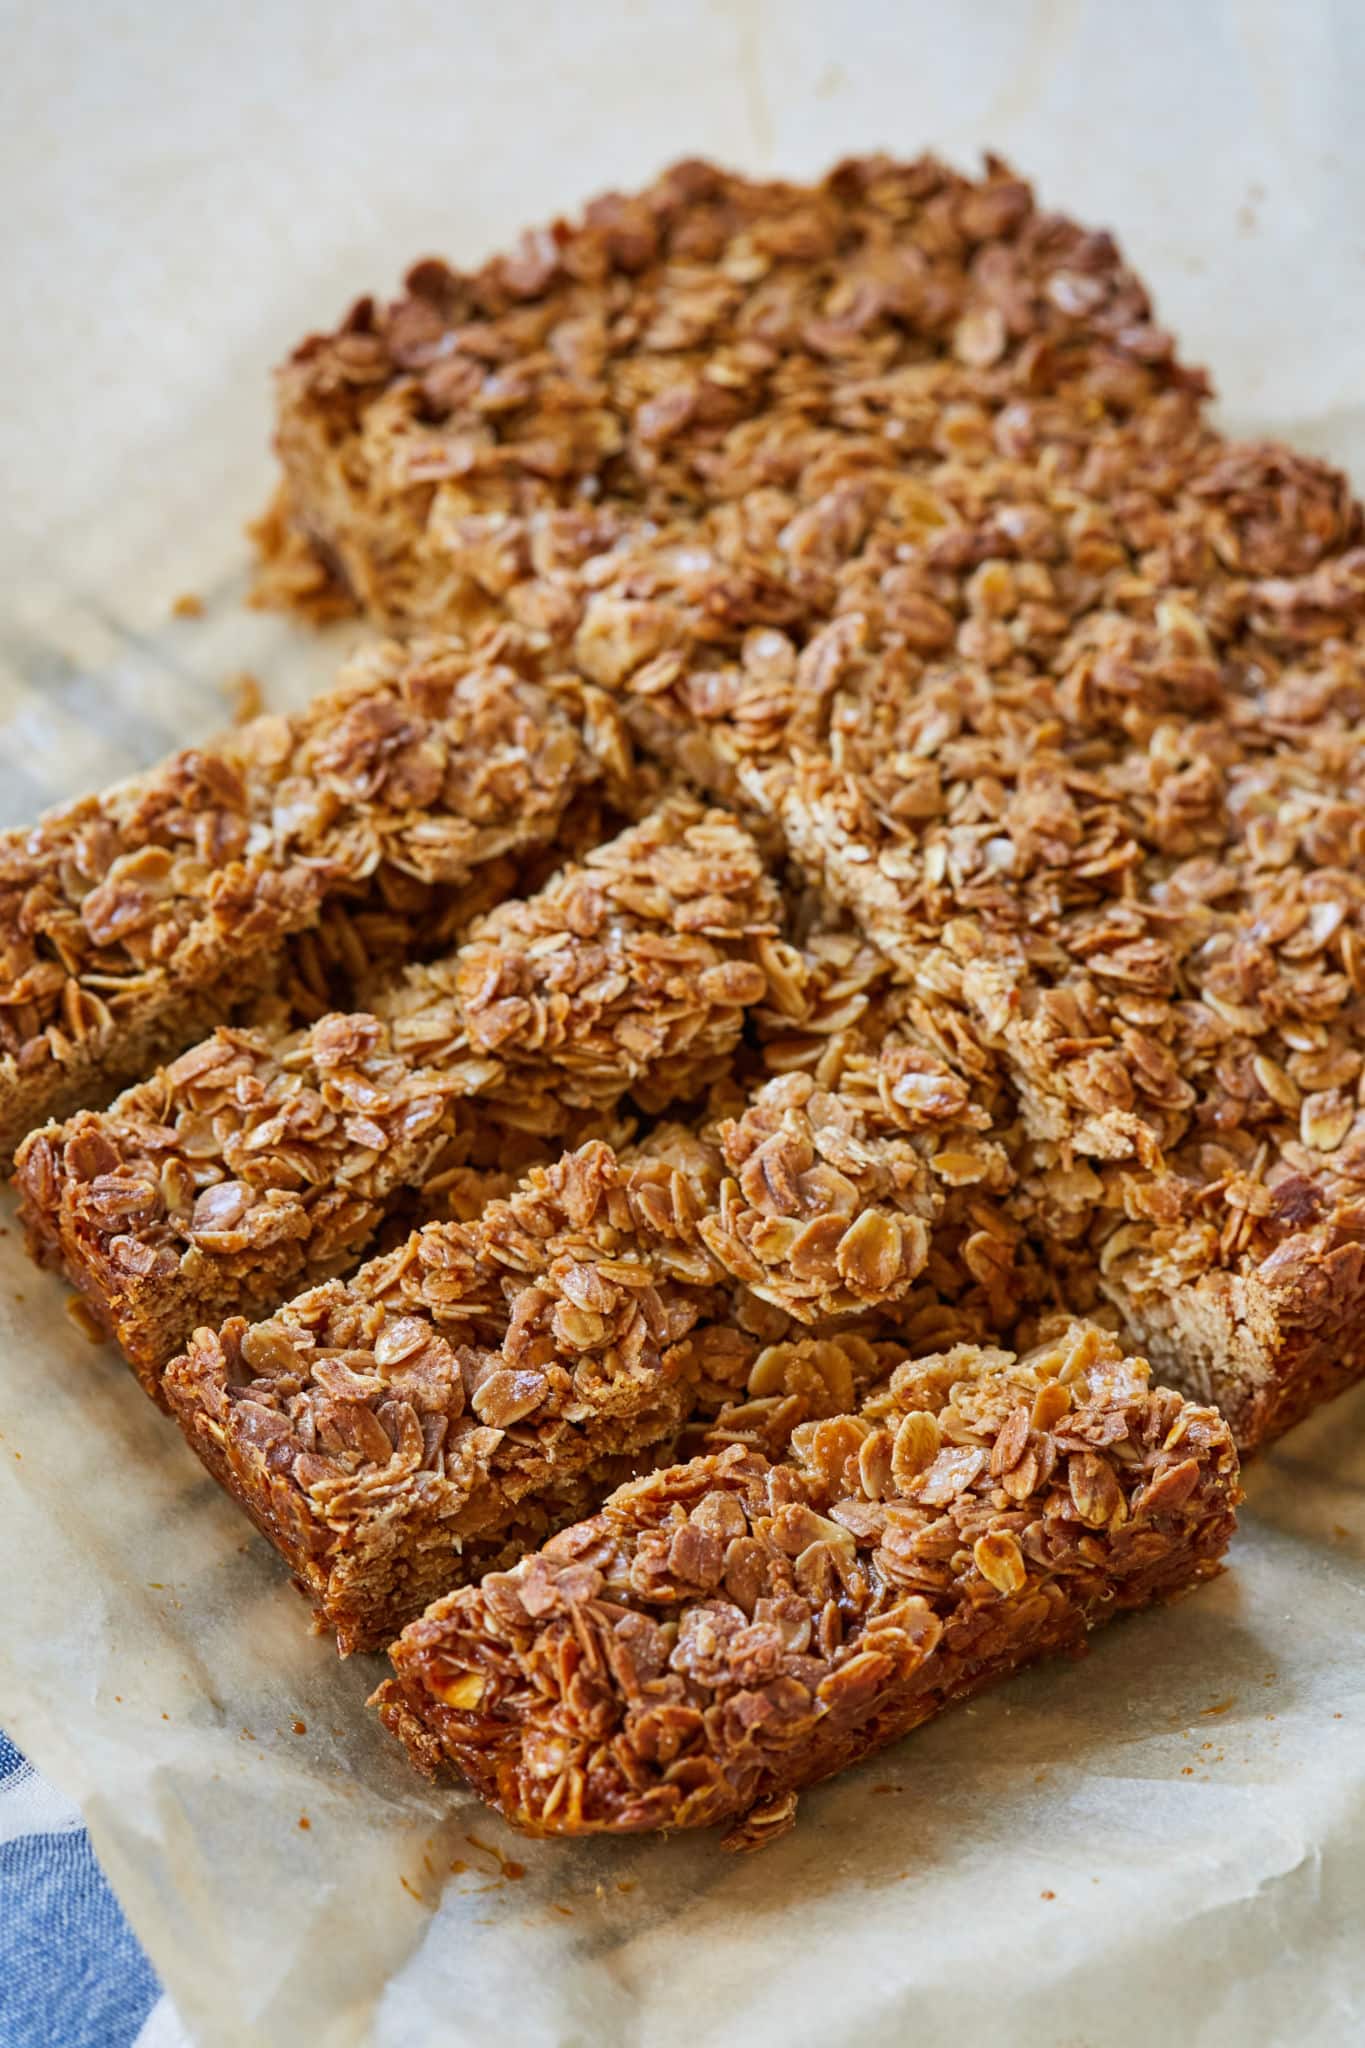 Homemade Irish Oat Flapjacks are sliced into individual bars. The oats are a golden brown.